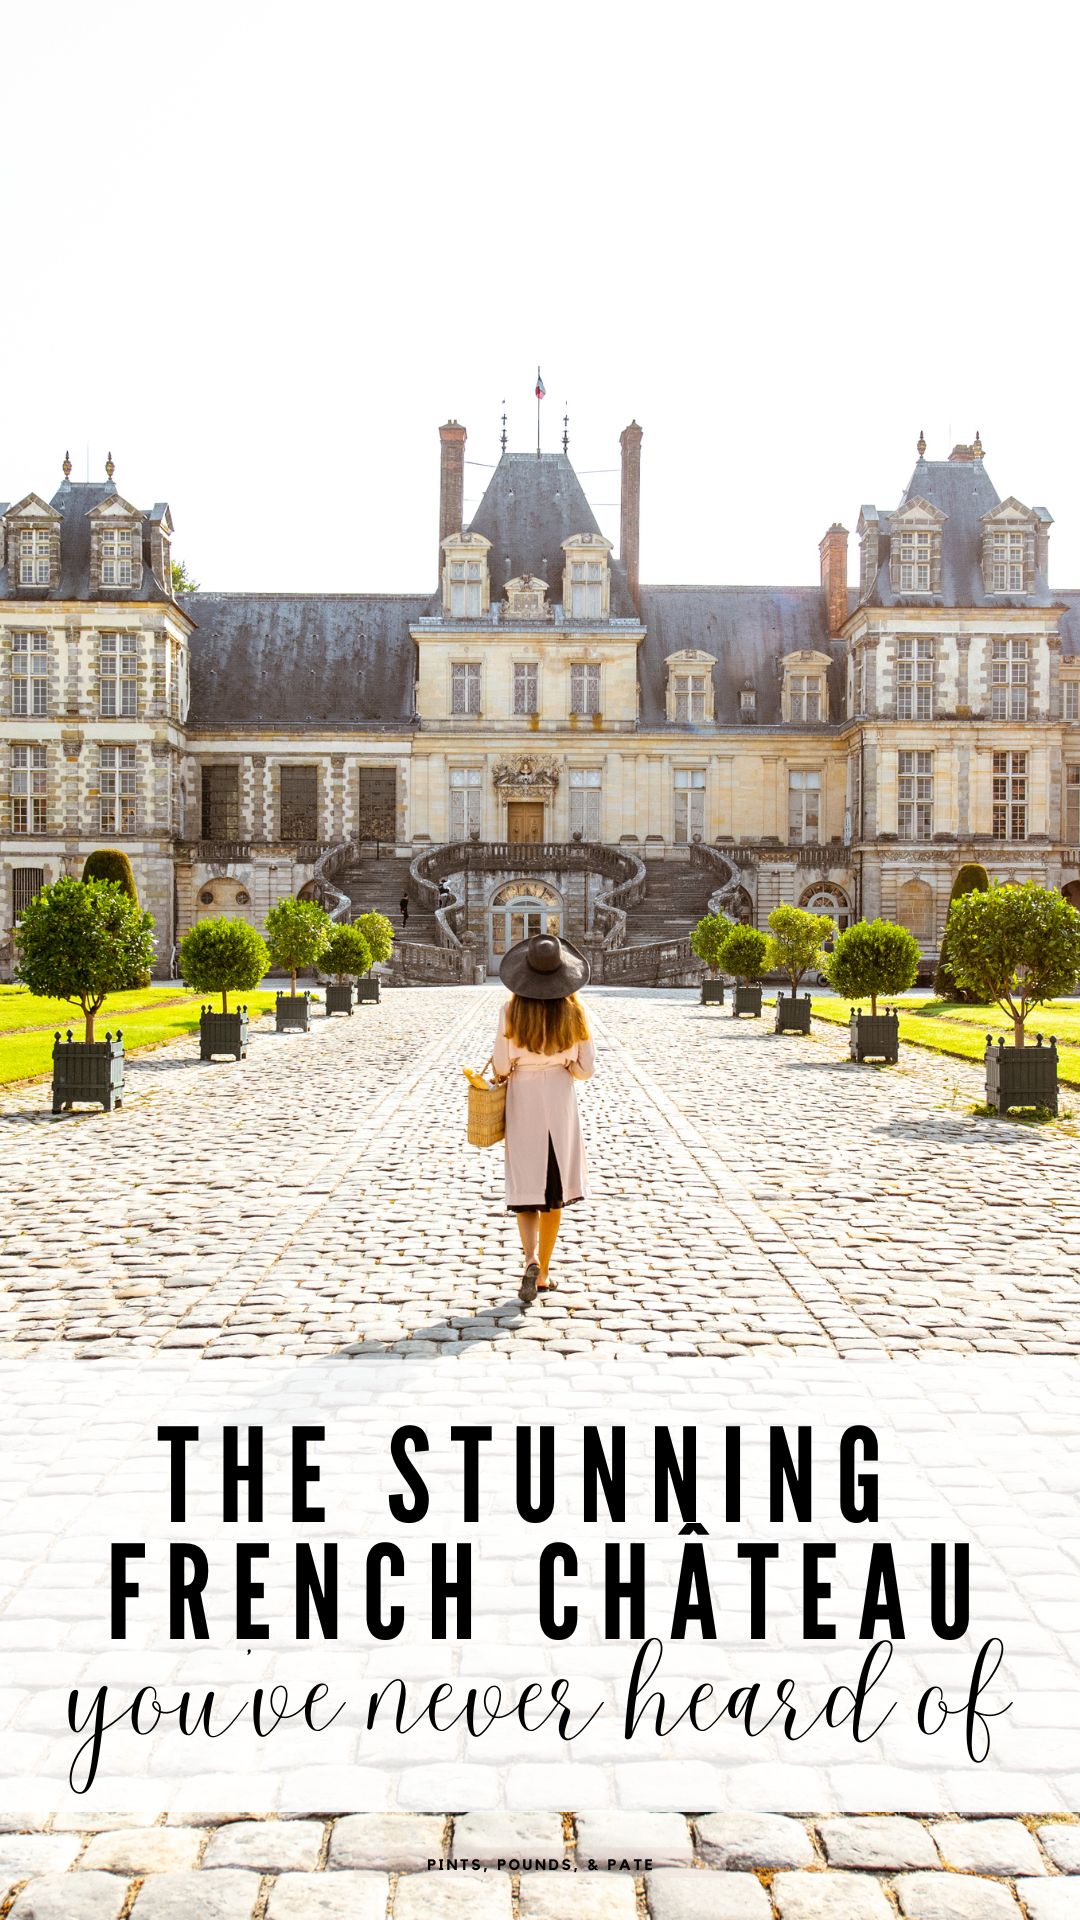 Exclusive Excerpt: A Day at Château de Fontainebleau - France Today